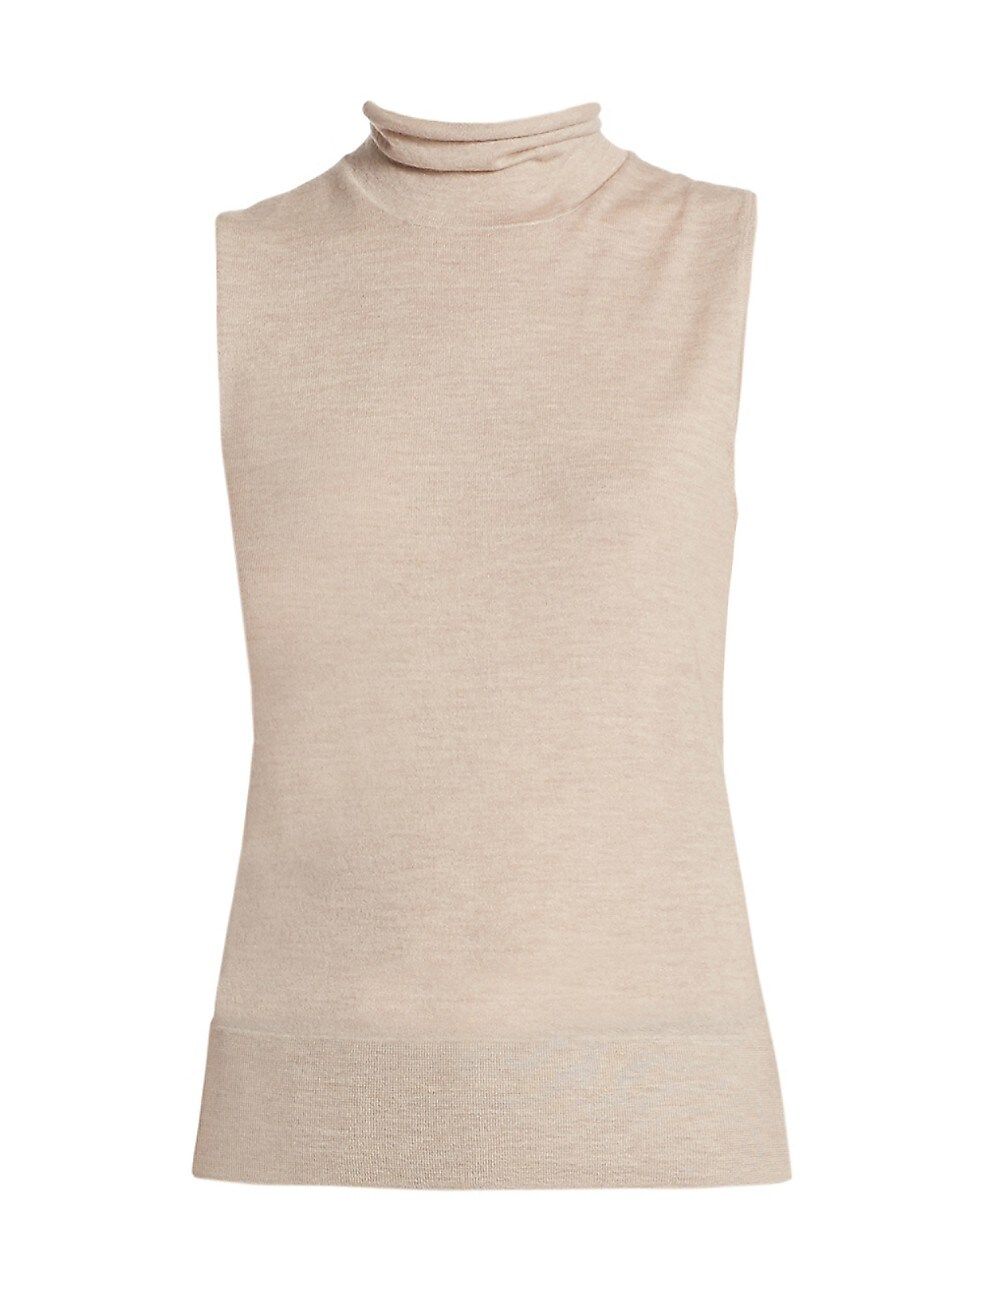 COLLECTION Cashmere Turtleneck Shell | Saks Fifth Avenue